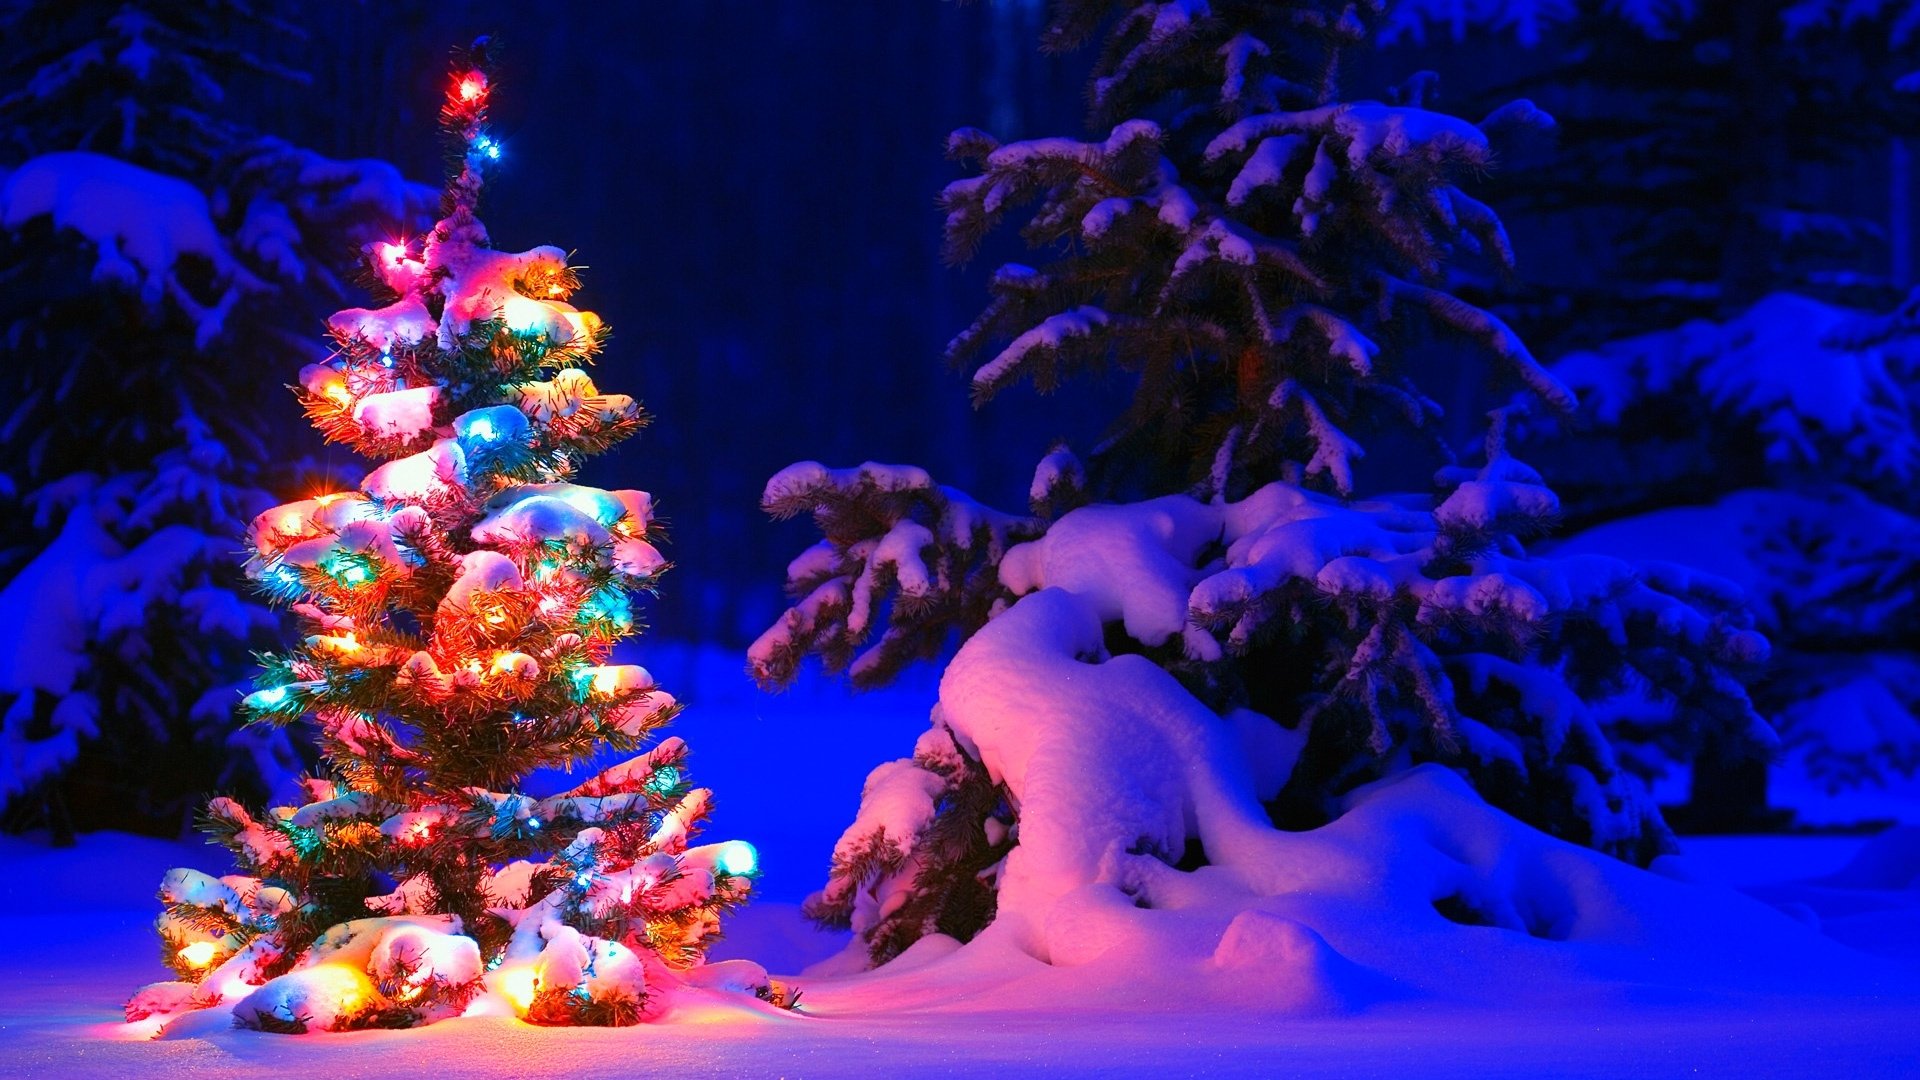 Lighted Christmas Tree in Winter Forest HD Wallpaper Background